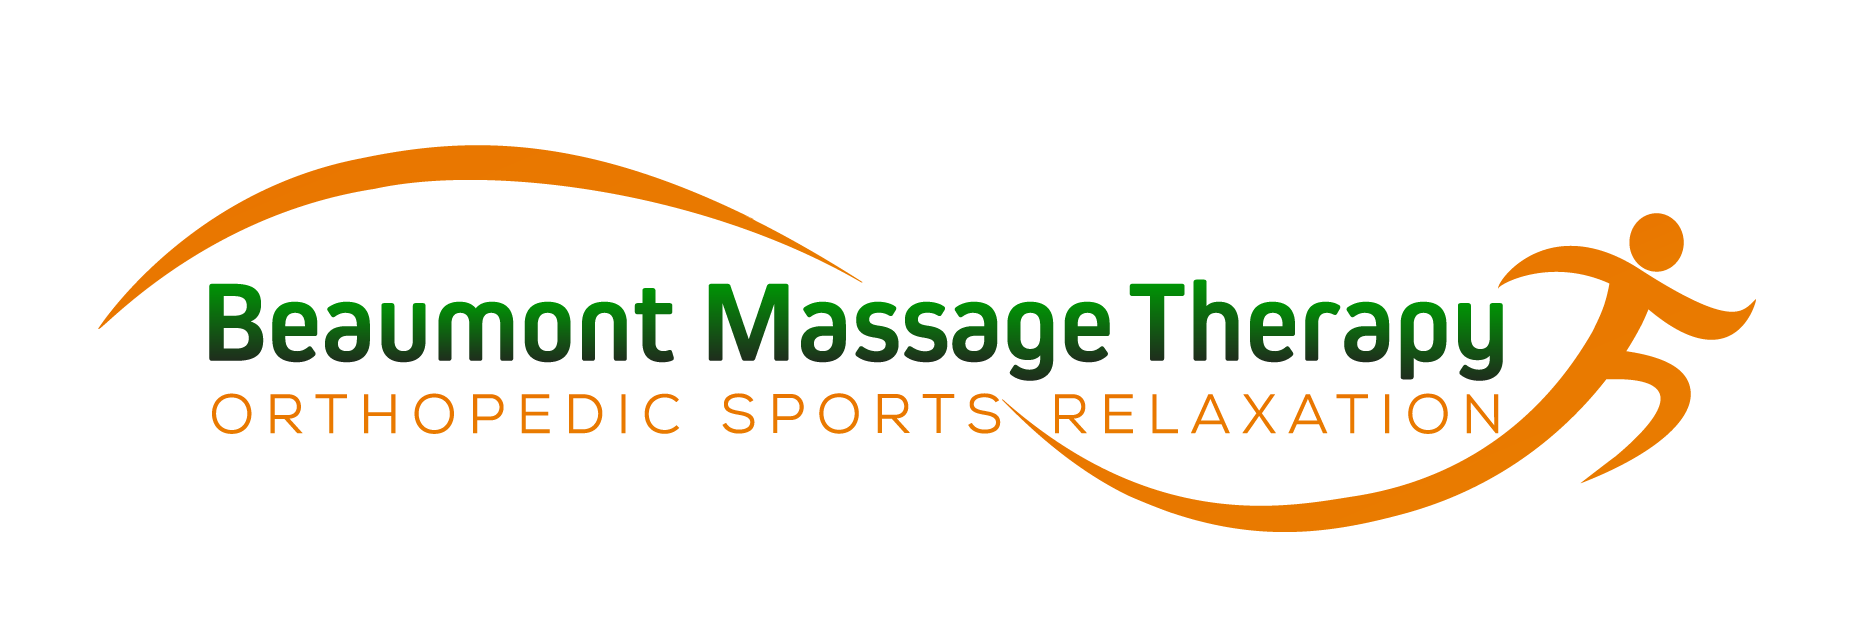 Beaumont Massage Therapy